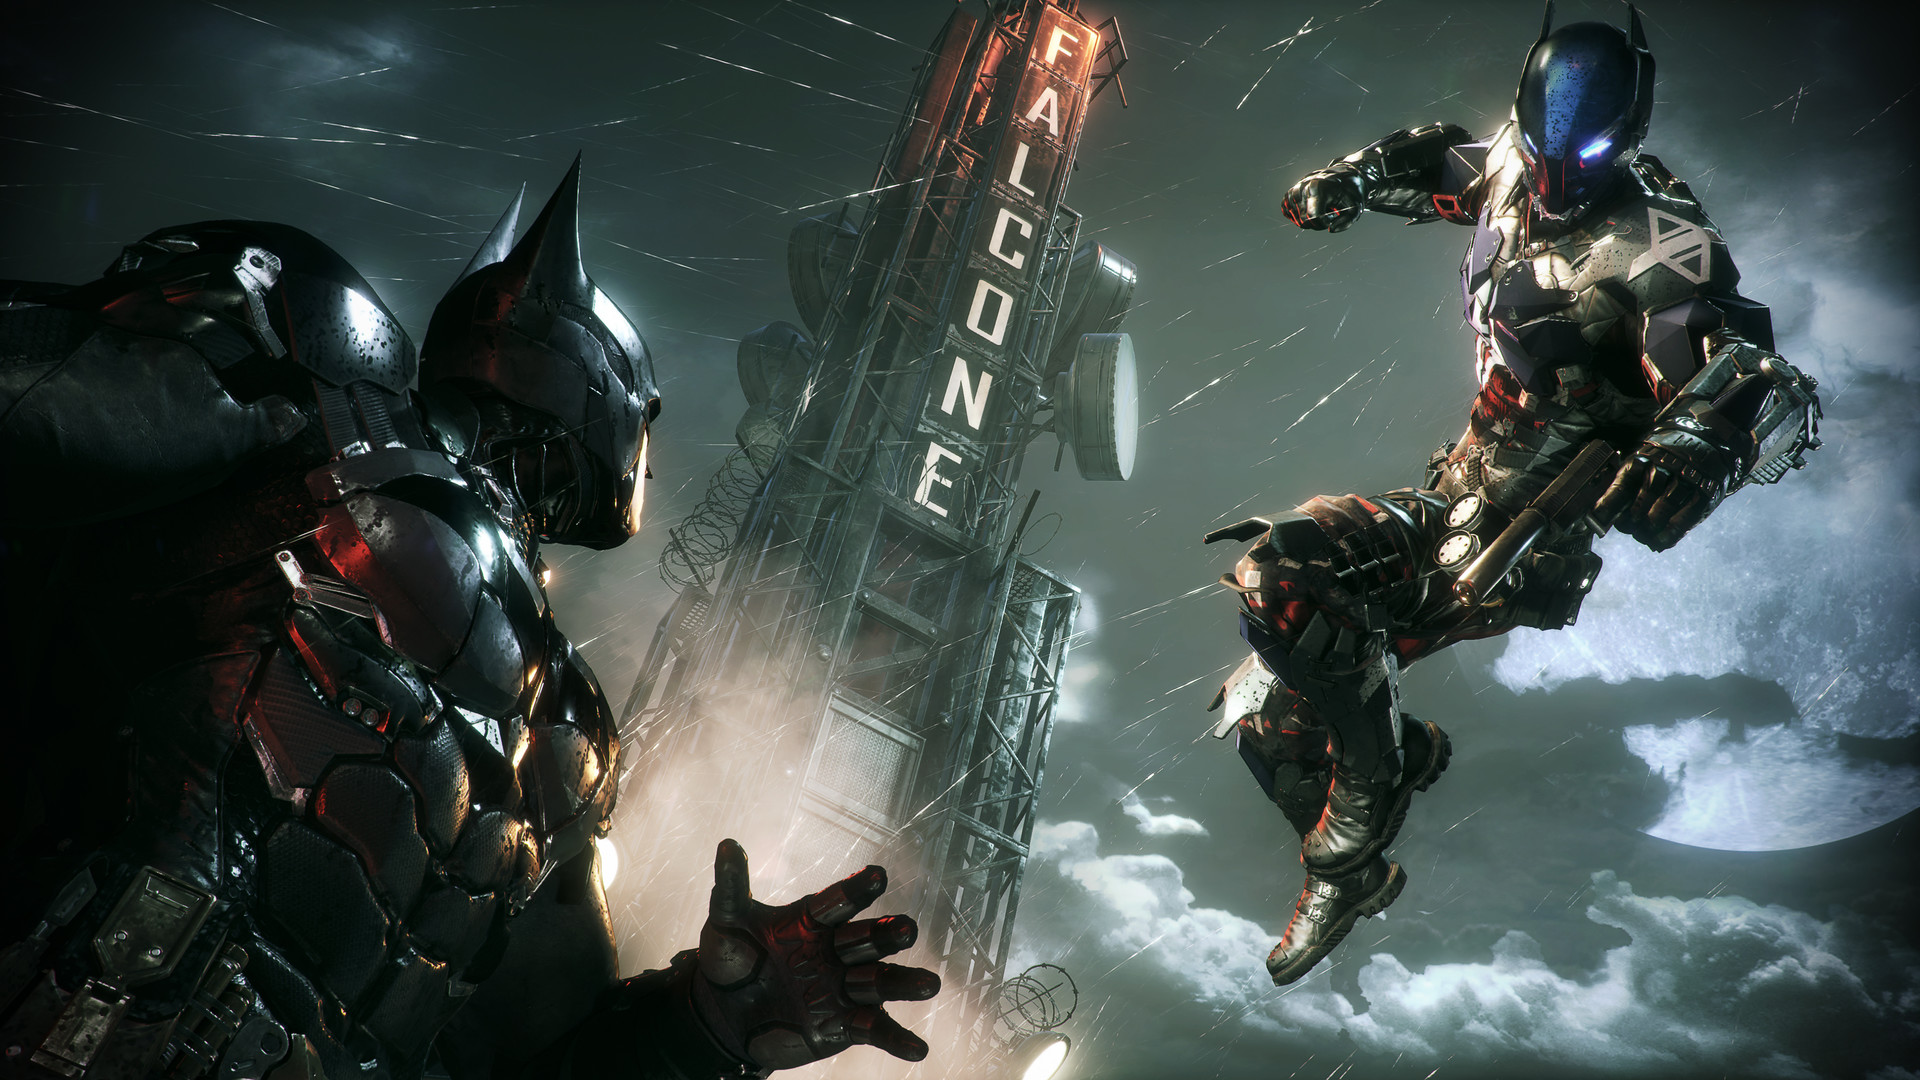 batman pc game free download full version highly compressed